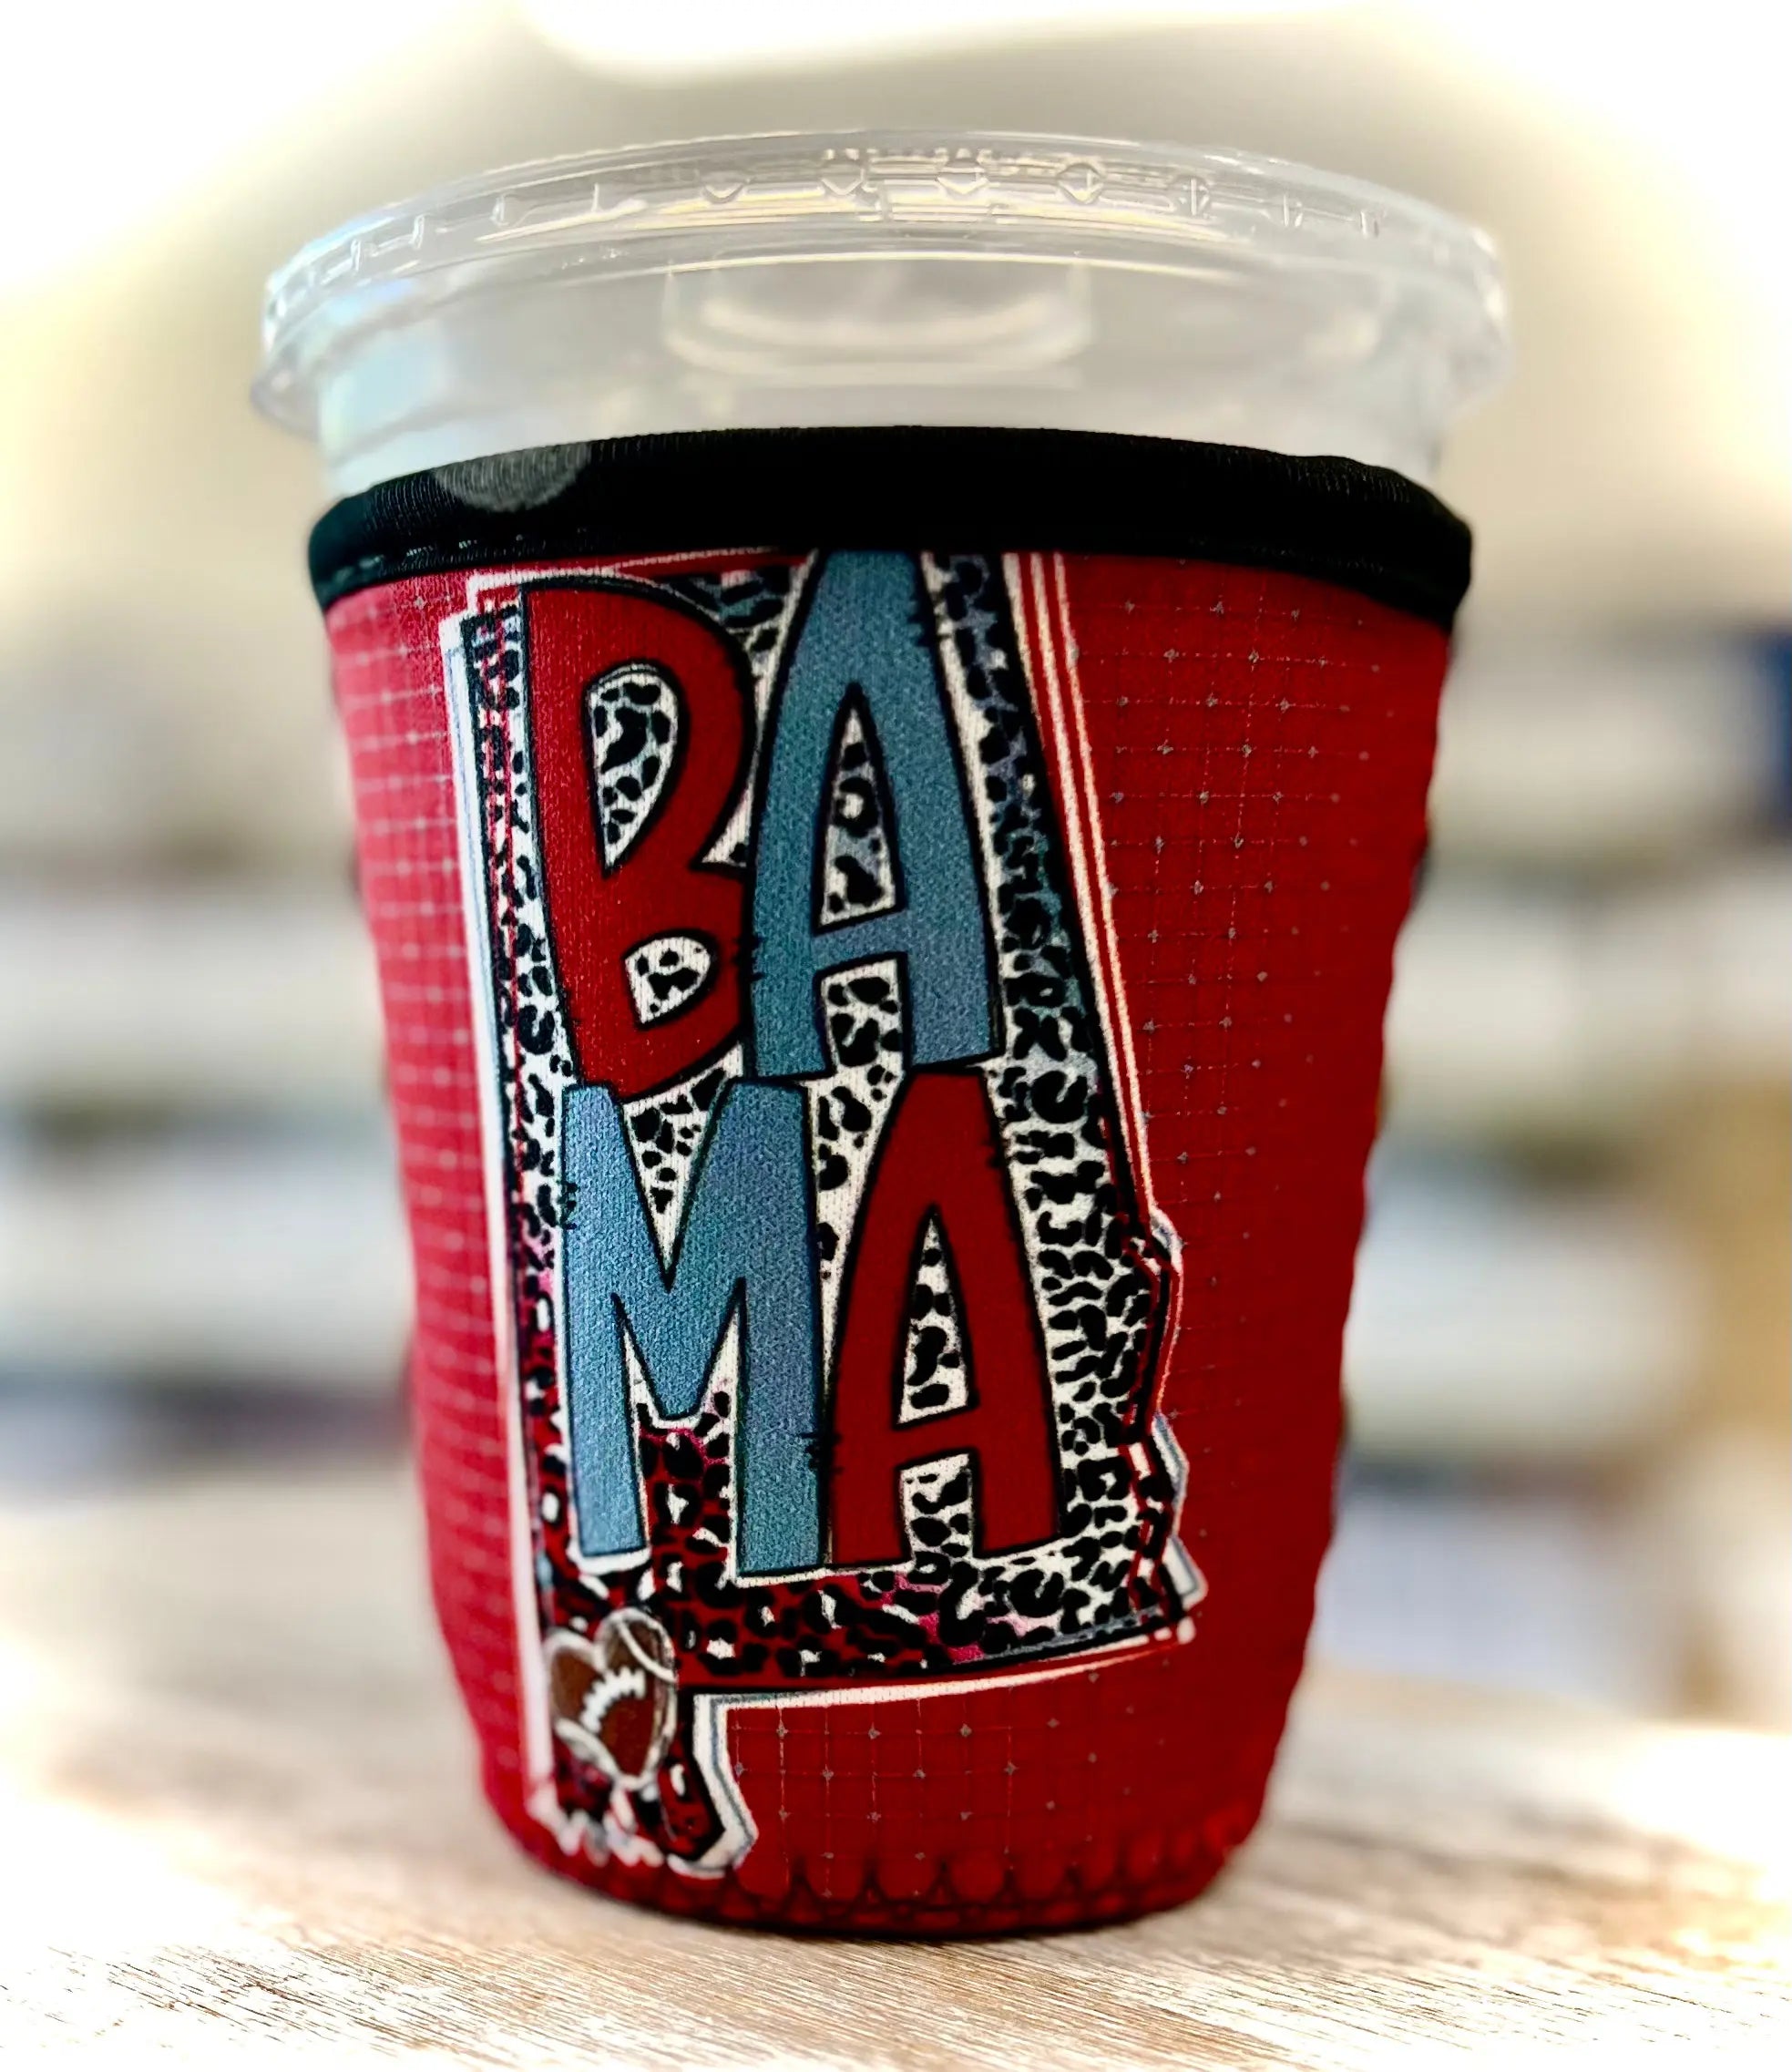 https://cdn.shopify.com/s/files/1/1826/7909/files/16-OZ-ALABAMA-Insulated-Cup-Cover-Sleeve--LIMITED-Kim-s-Korner-Wholesale-1692024438686.heic?v=1692024439